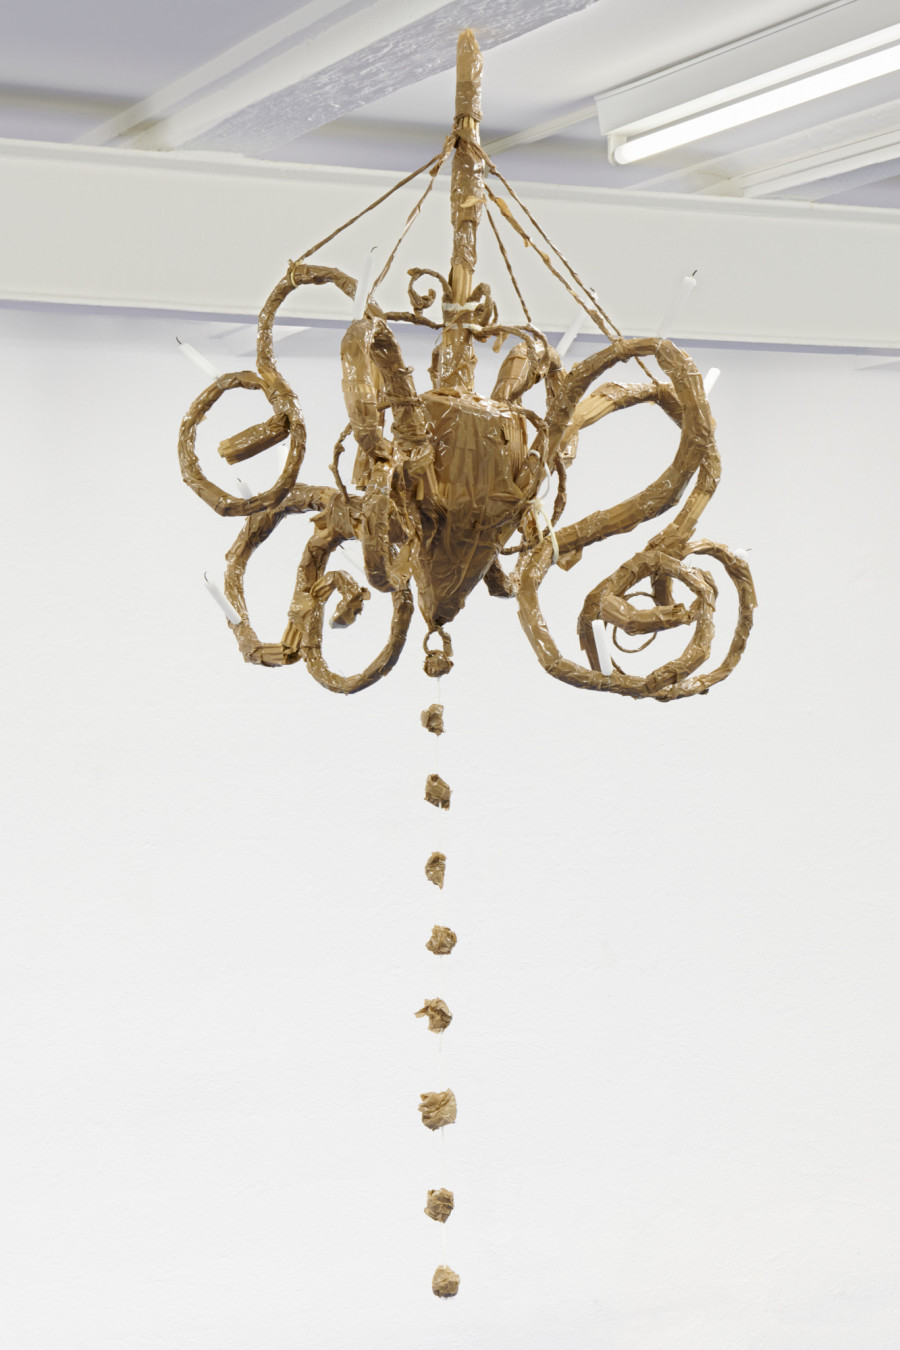 Jeremy, Un chandelier, 2021/ Photo: Guillaume Python / Courtesy: the artist and WallStreet